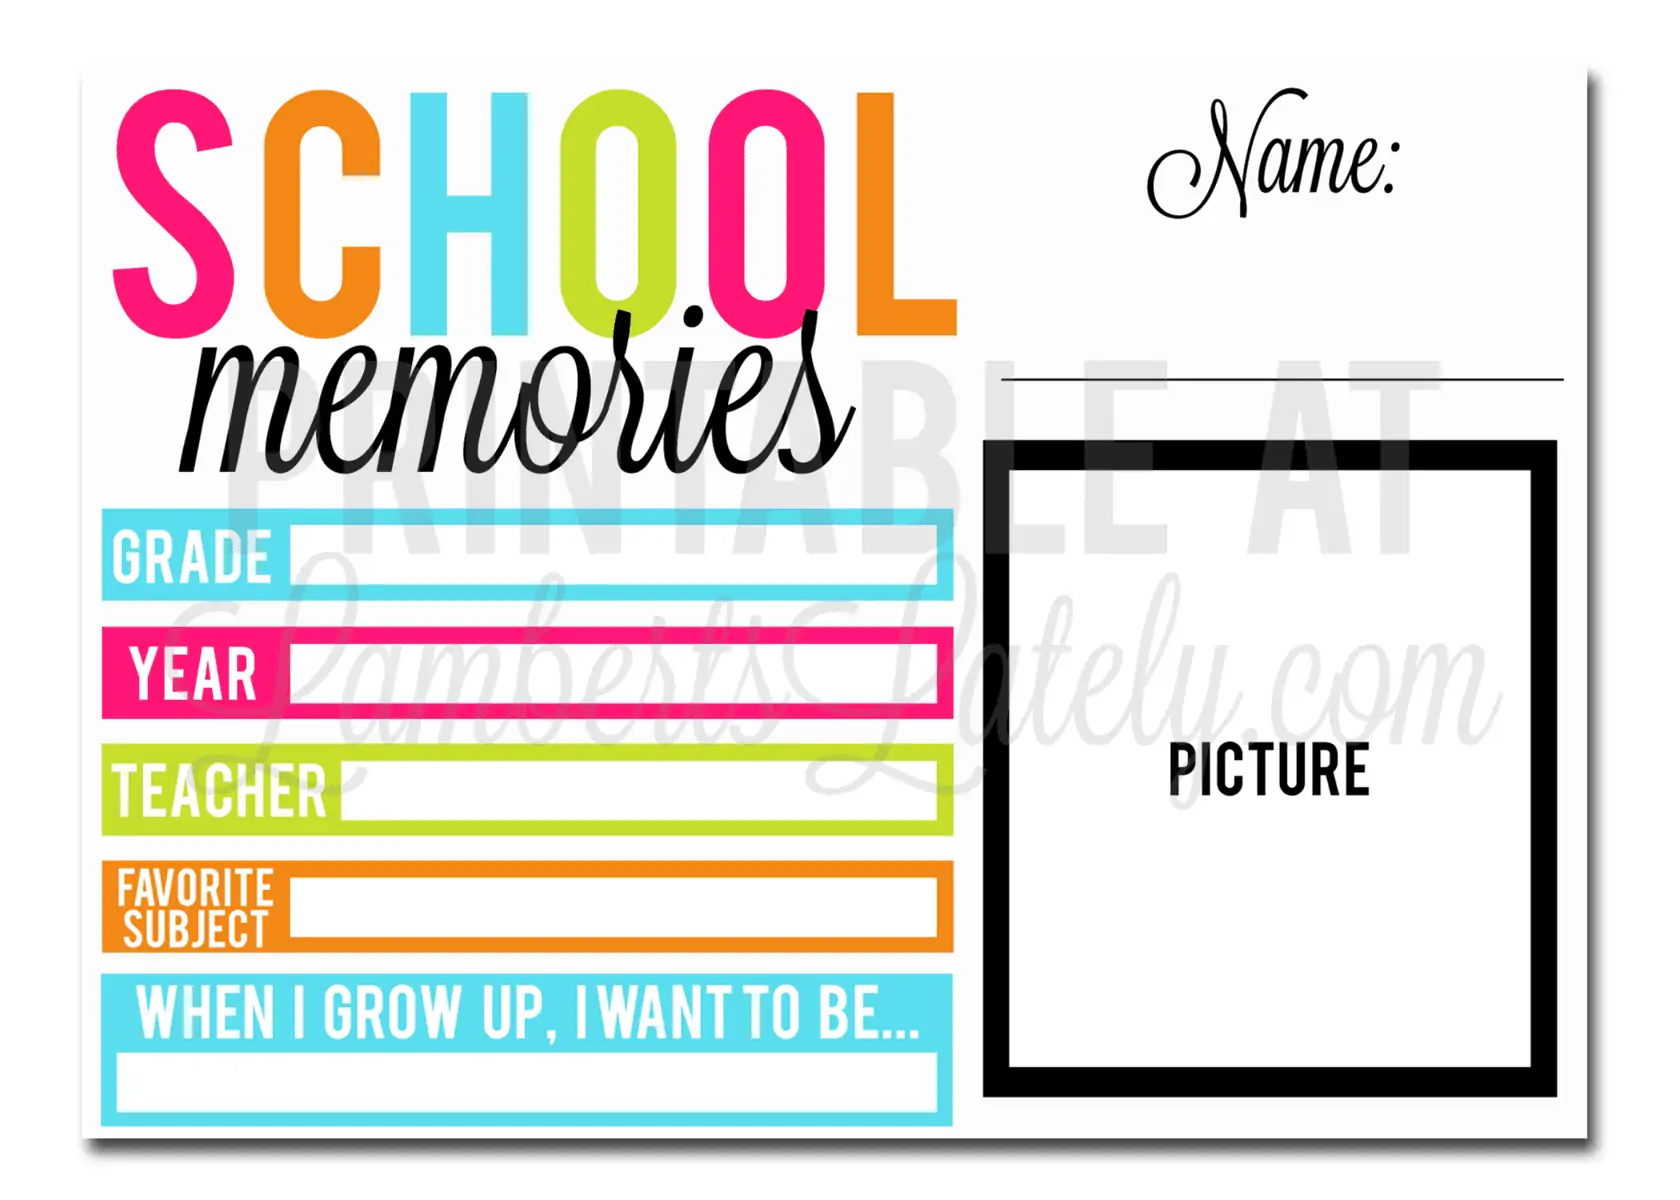 school memories printable with blanks to answer questions and a spot for pictures.